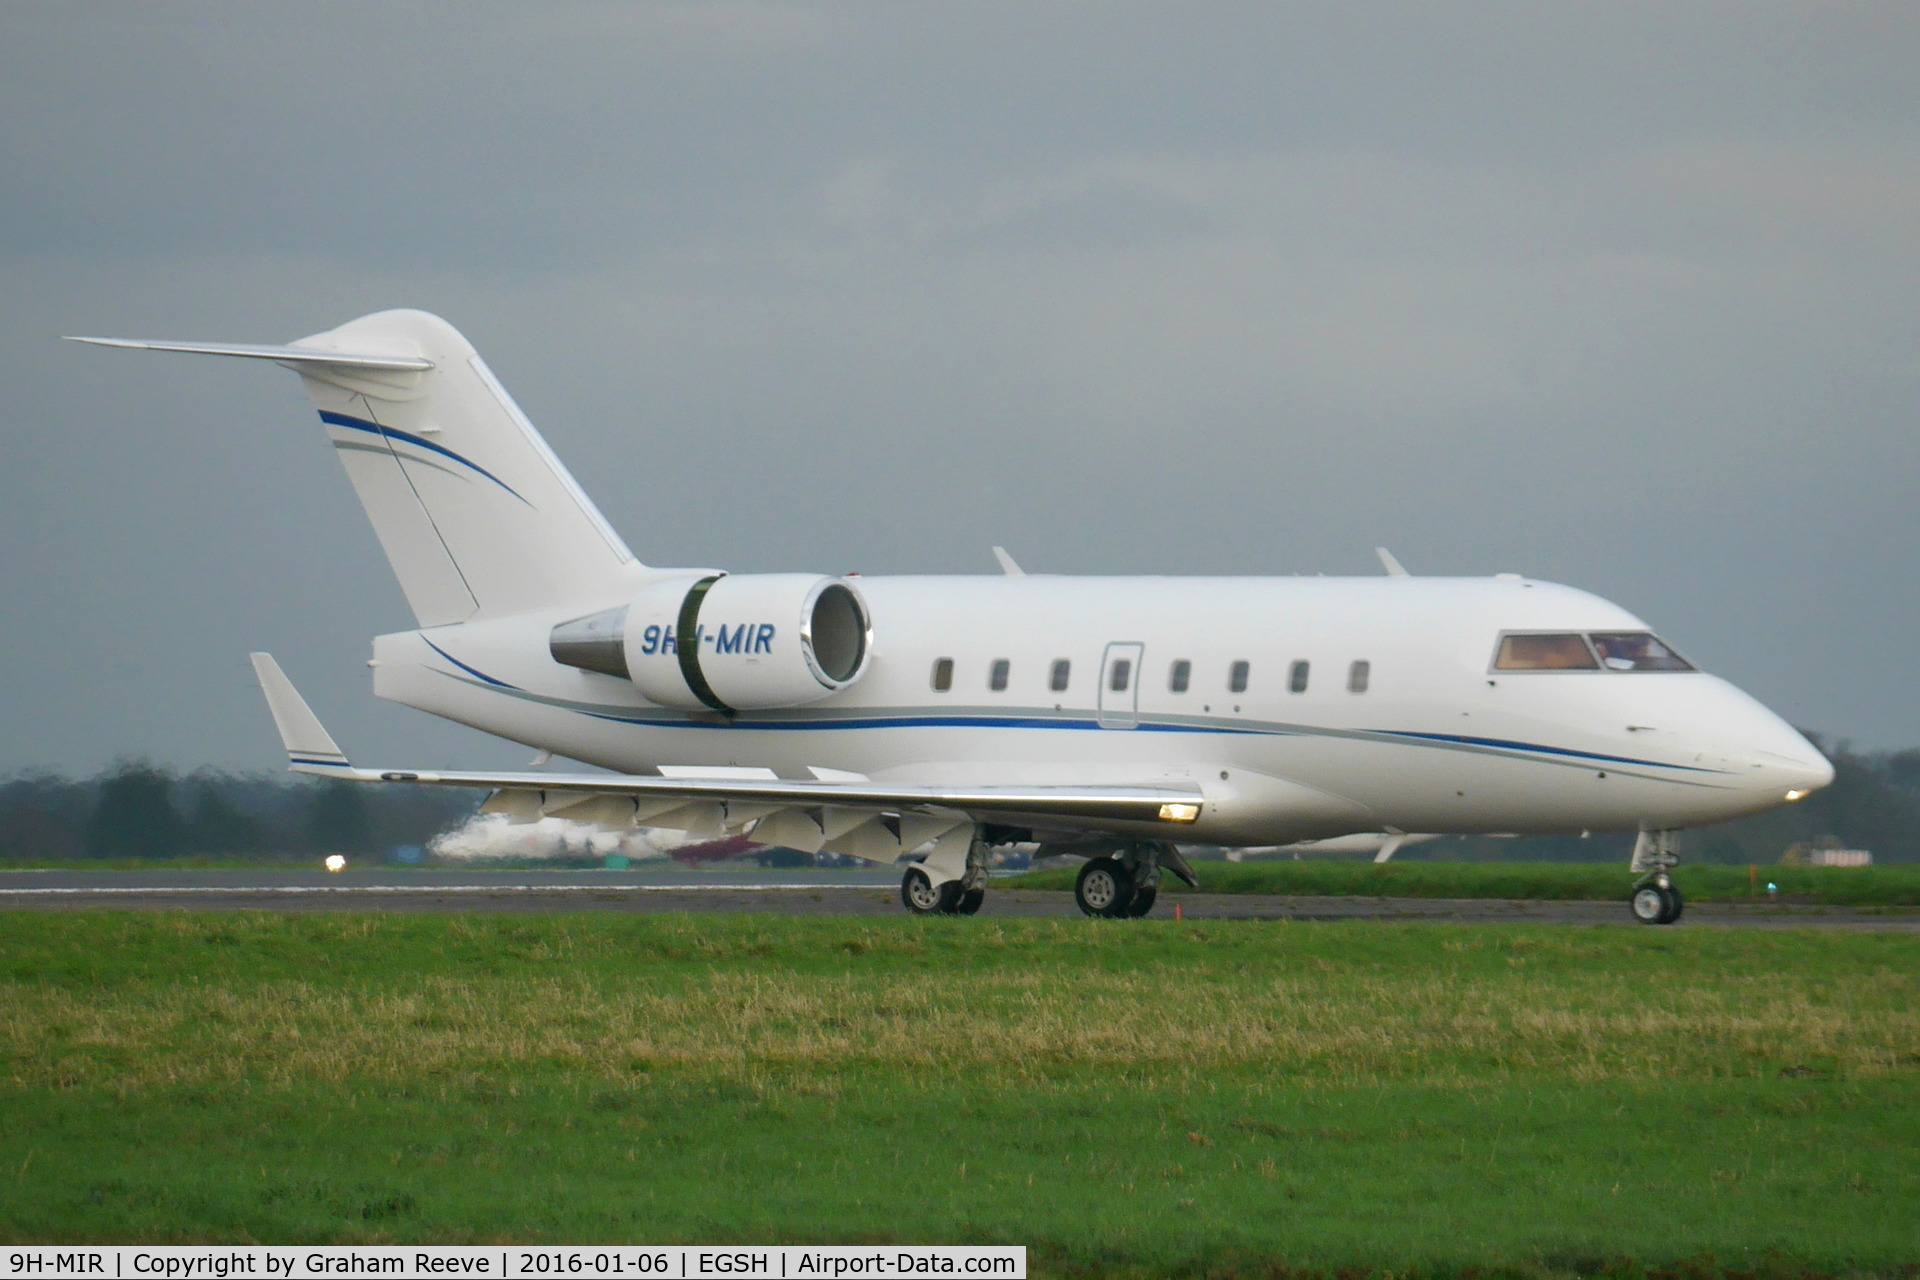 9H-MIR, 1998 Bombardier Challenger 604 (CL-600-2B16) C/N 5368, Just landed at Norwich